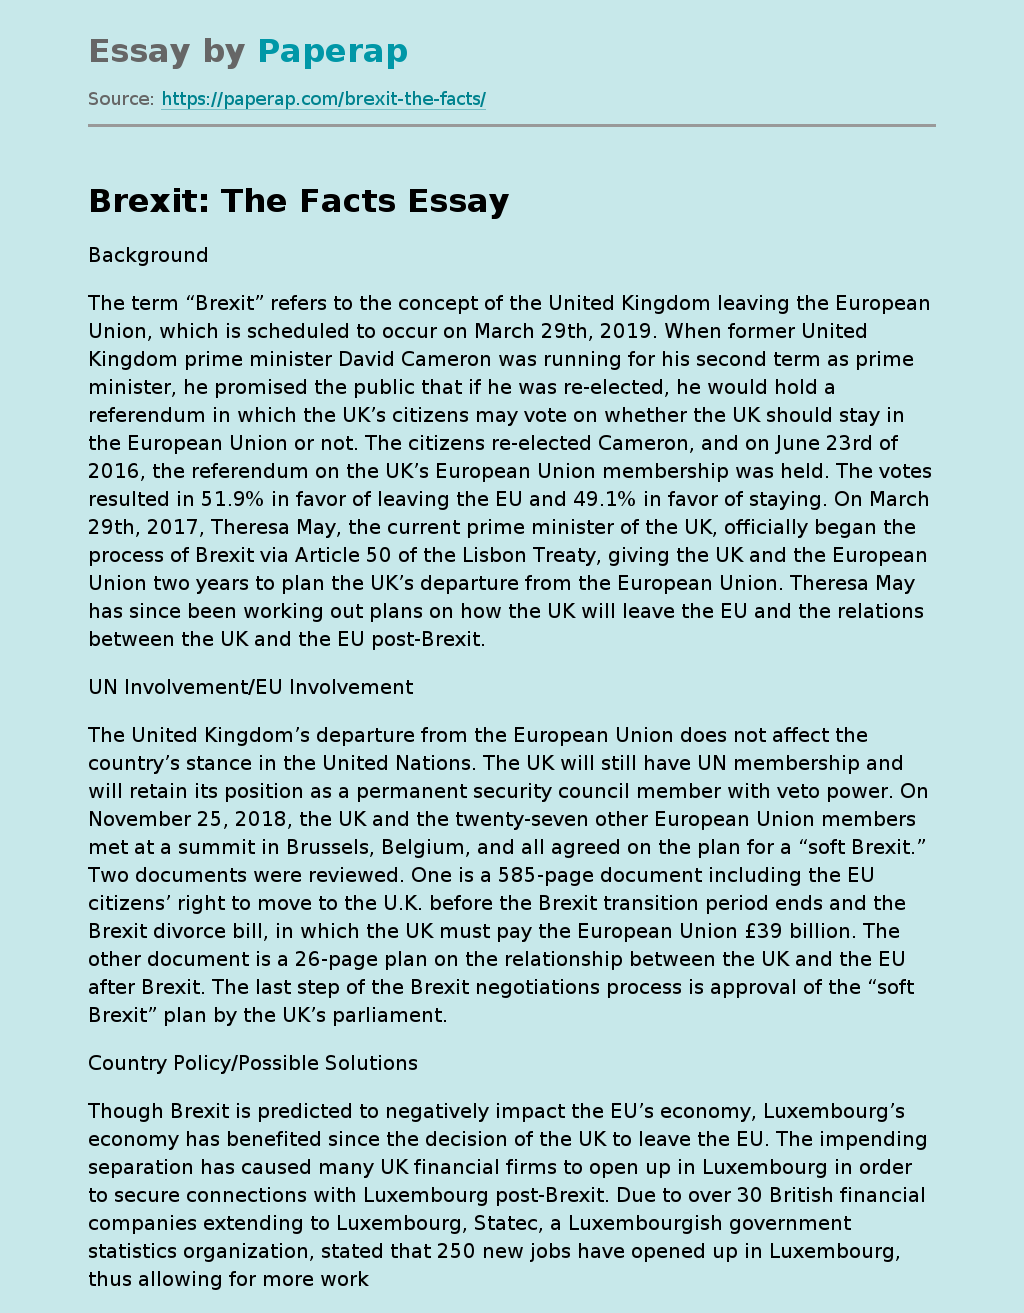 Brexit: The Facts